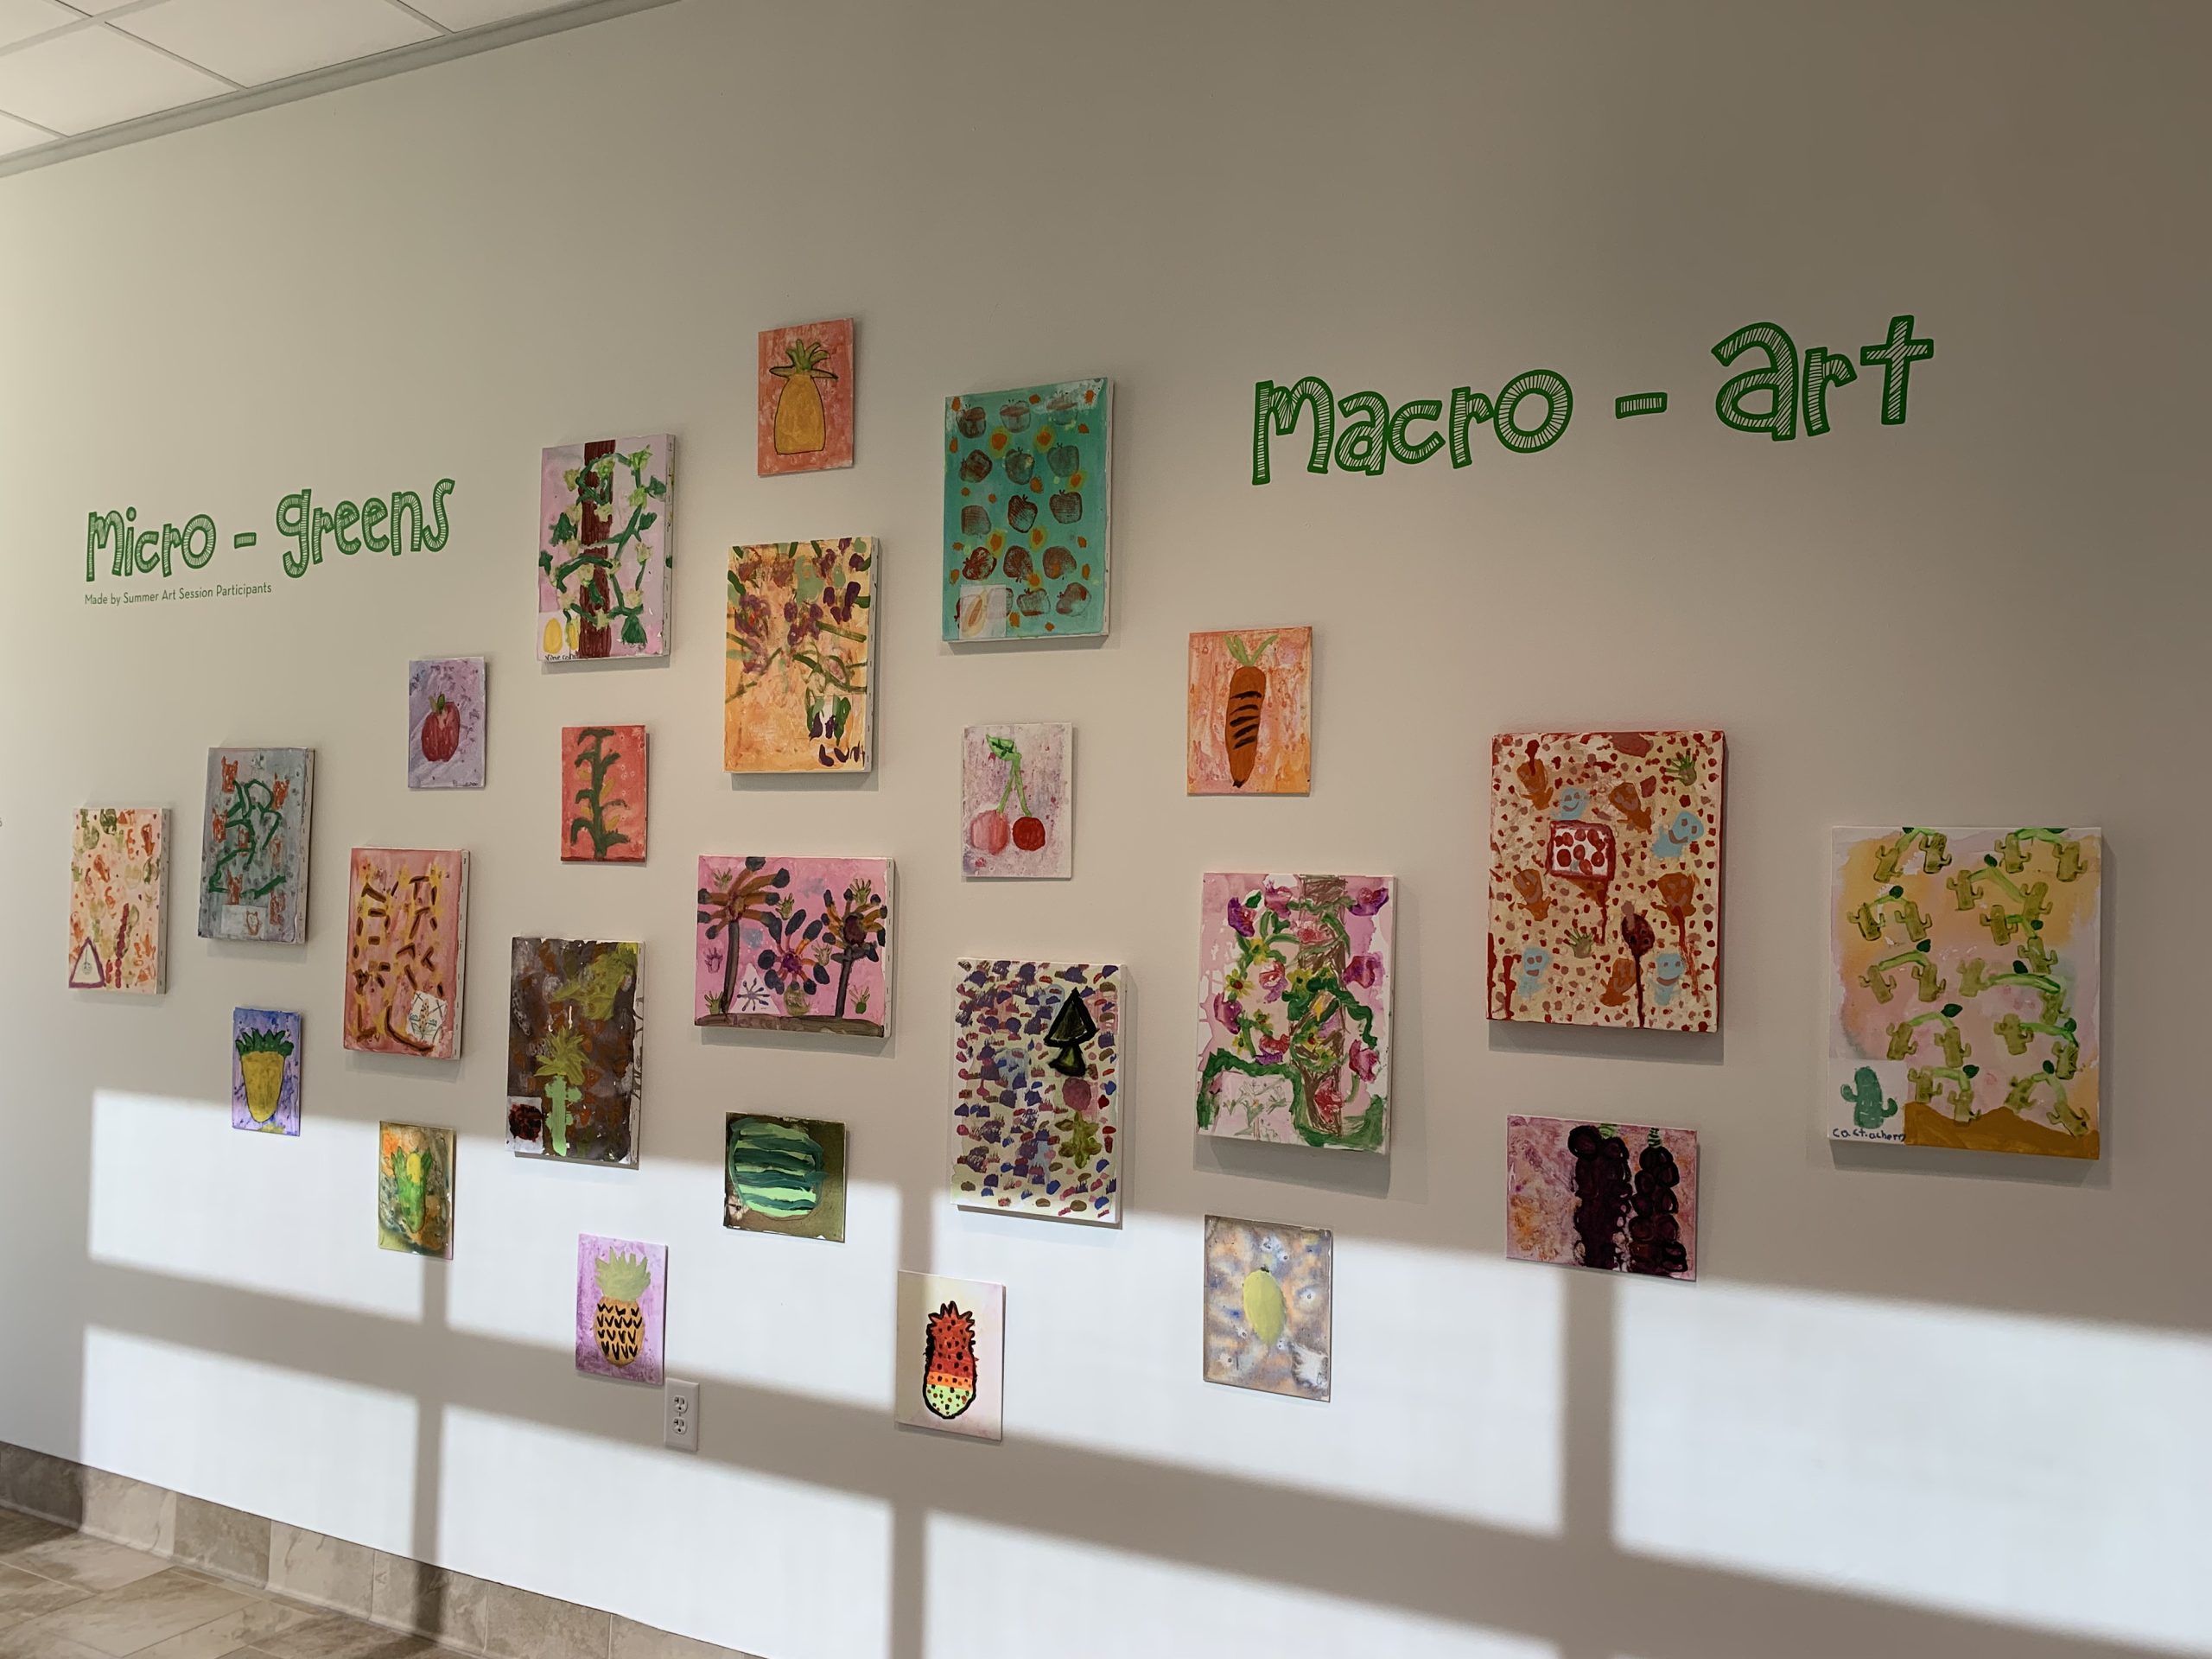 Image shows a display of botanical paintings created by younger Art Session participants; the paintings are hung in a large horizontal diamond shape, which stretches across the entire wall. The paintings are arranged in a loose, pattern, similar to a checkerboard or alternating up-and-down positions. 